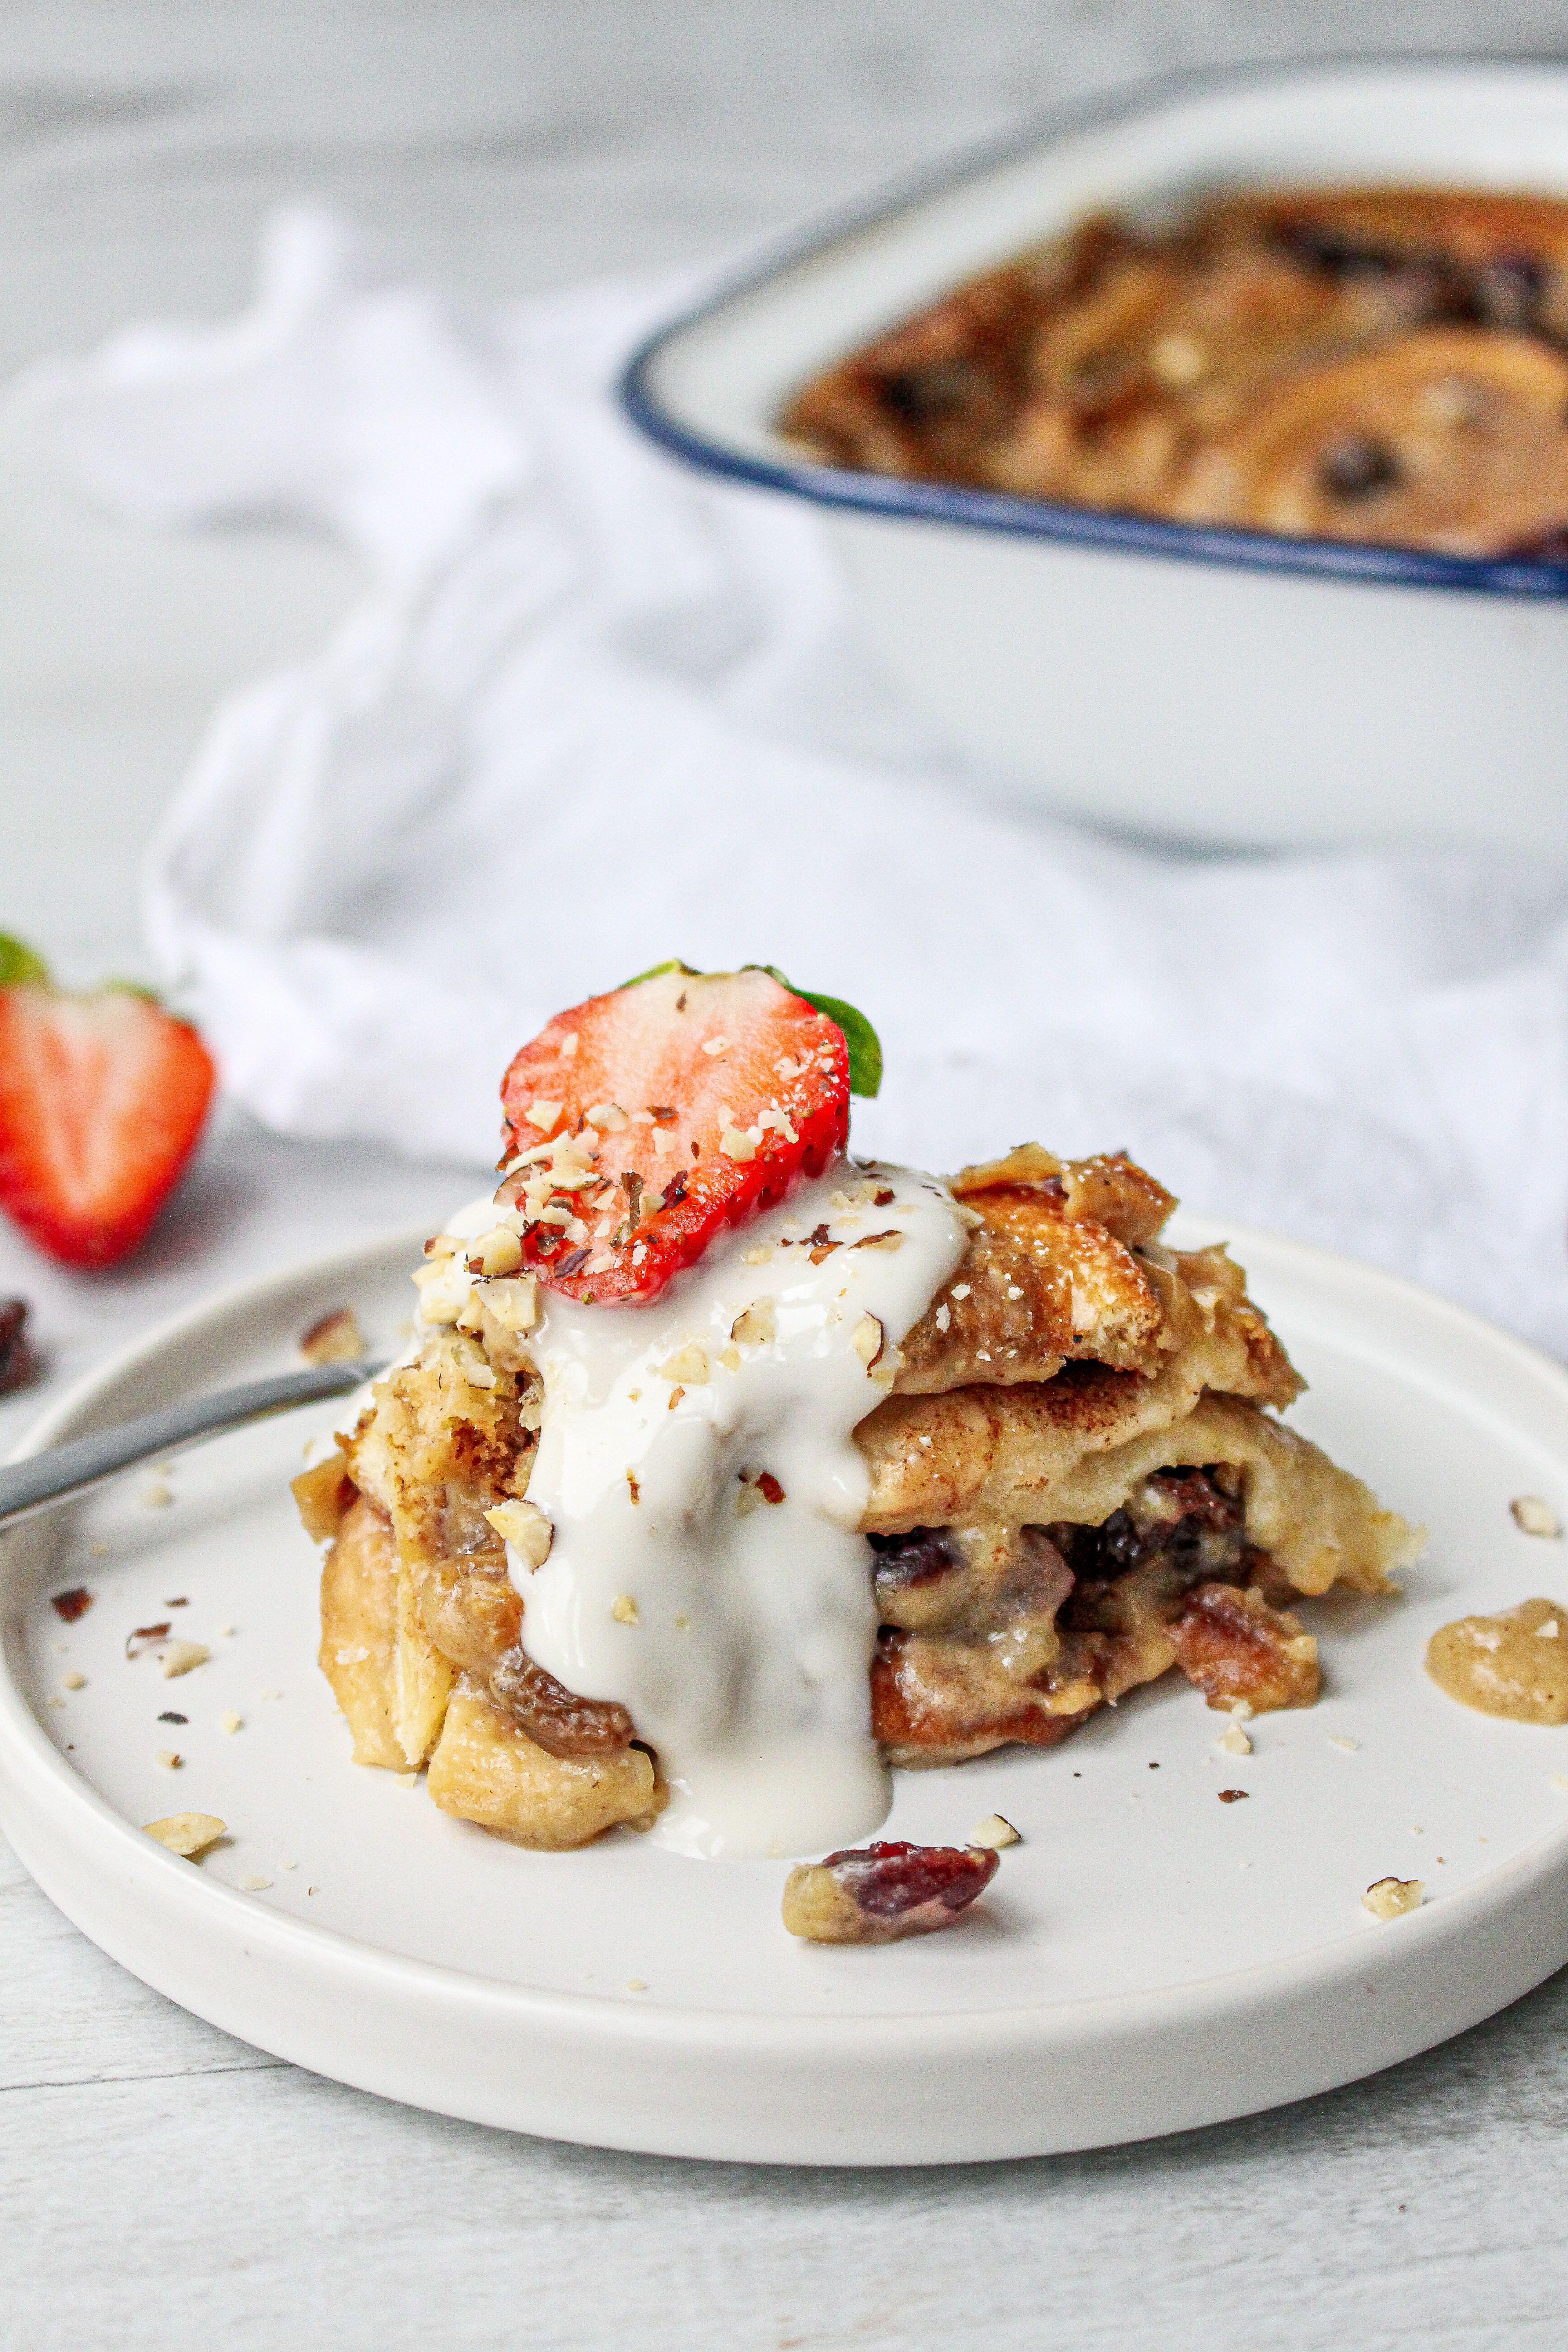 Vegan Cinnamon and Cardamom Bread and Butter Pudding